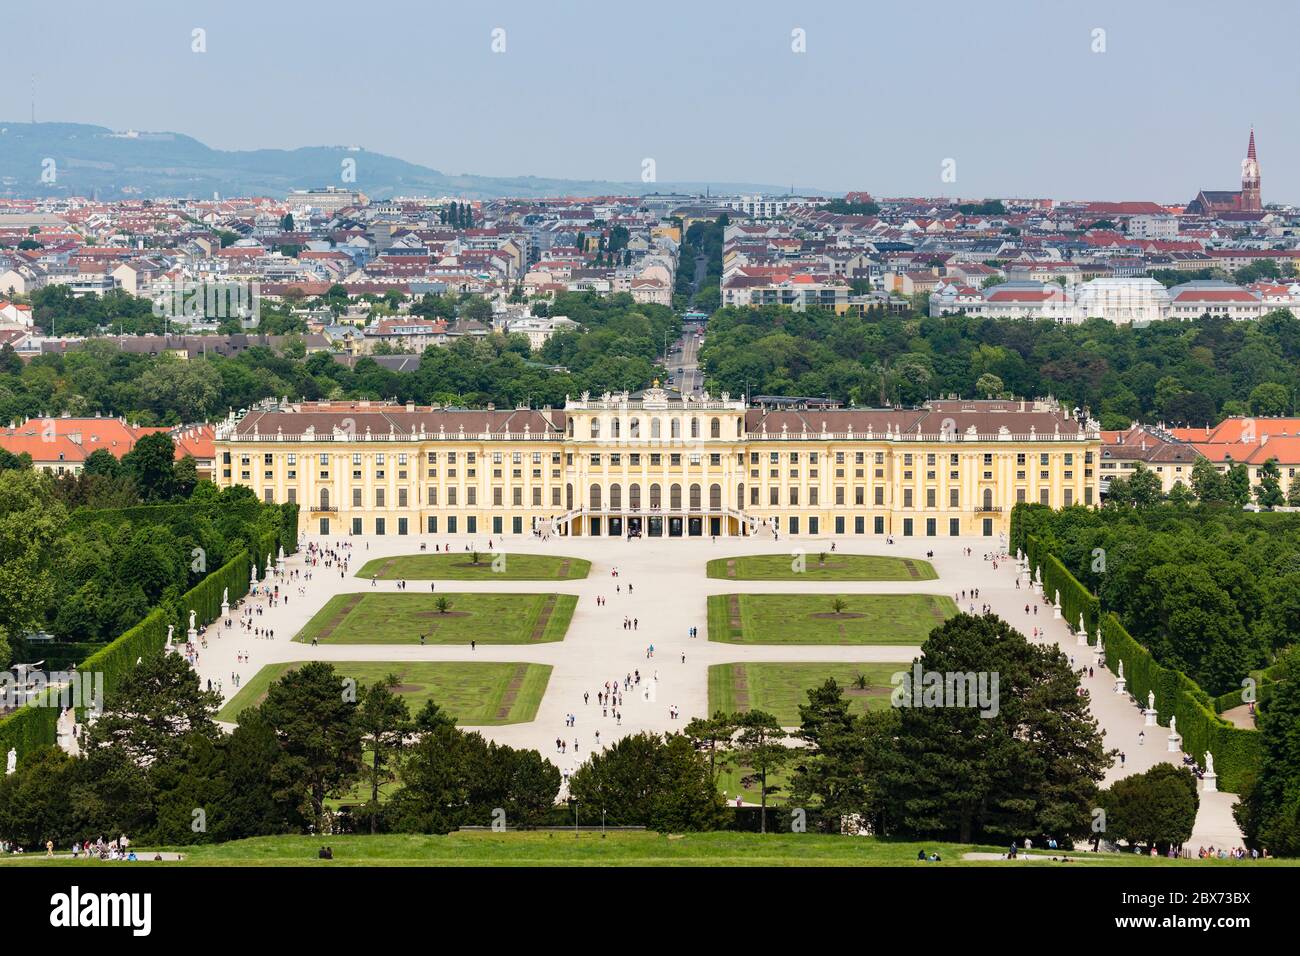 View to Schoenbrunn Palace park in Vienna, Austria with tourists in the foreground. Stock Photo